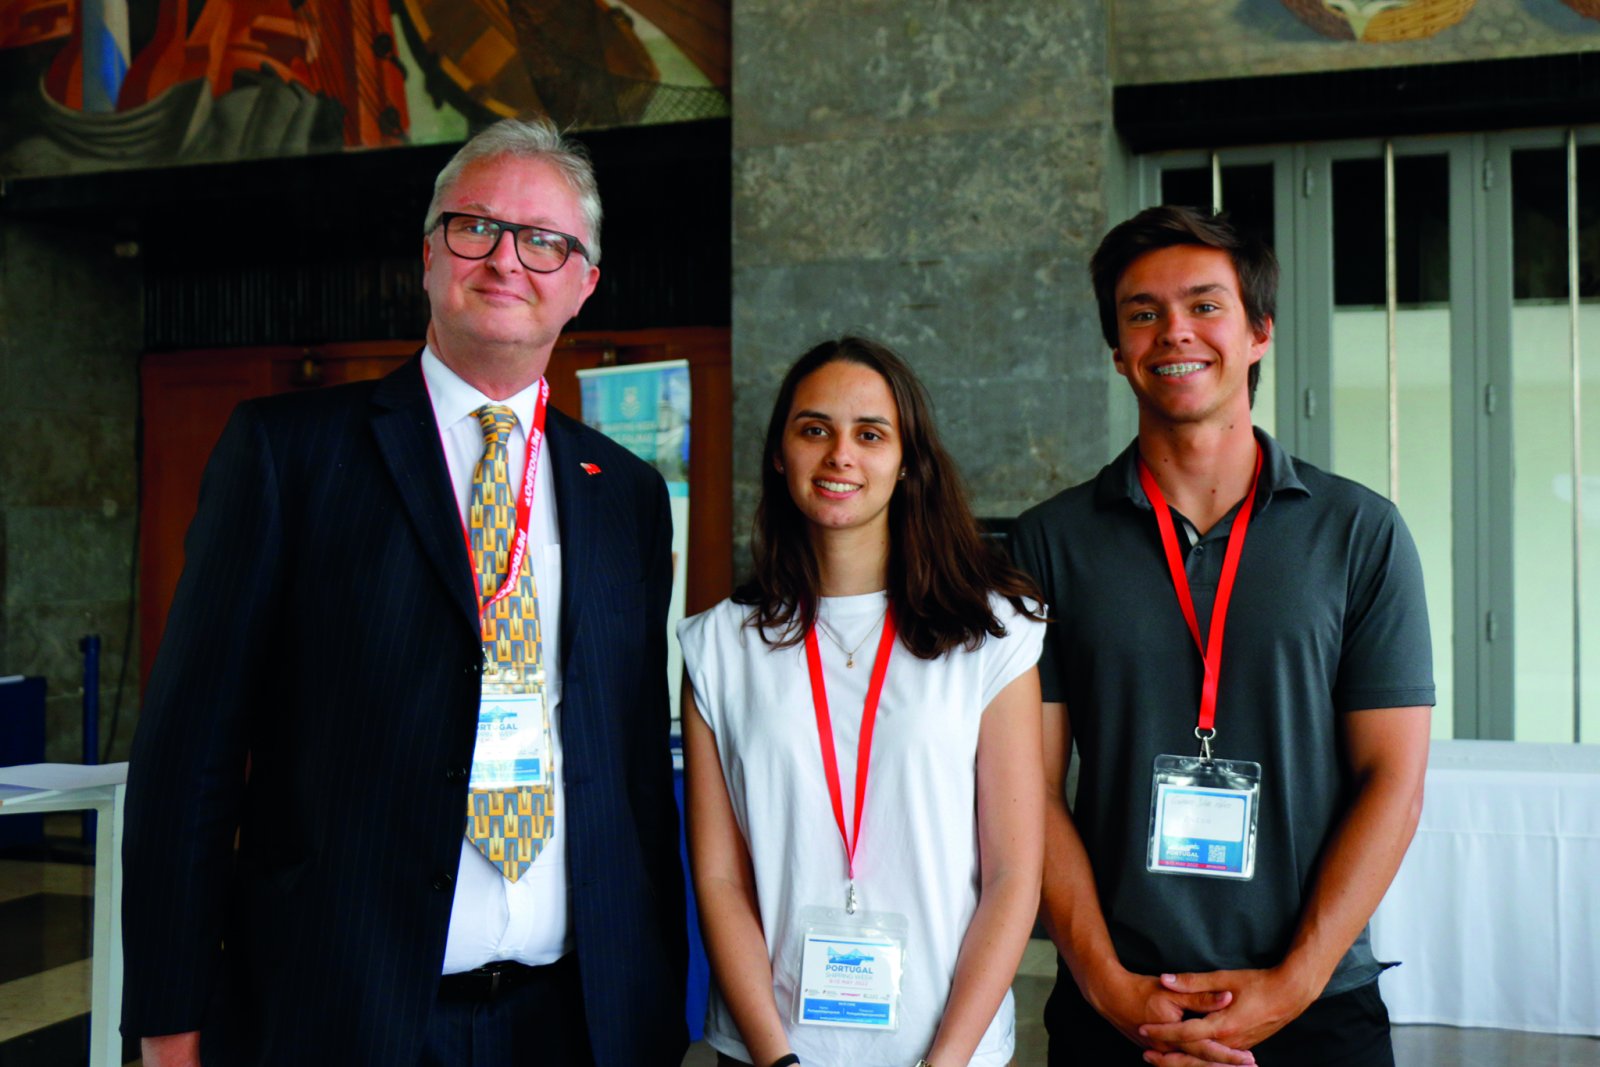 Petrospot’s Simon Robotham with Tânia Isabel Fernandes Candeias and Gustavo Alexandre Silva Pelixo representing Portugal’s Infante D. Henrique Nautical School - Bunkerspotted June/July 2022